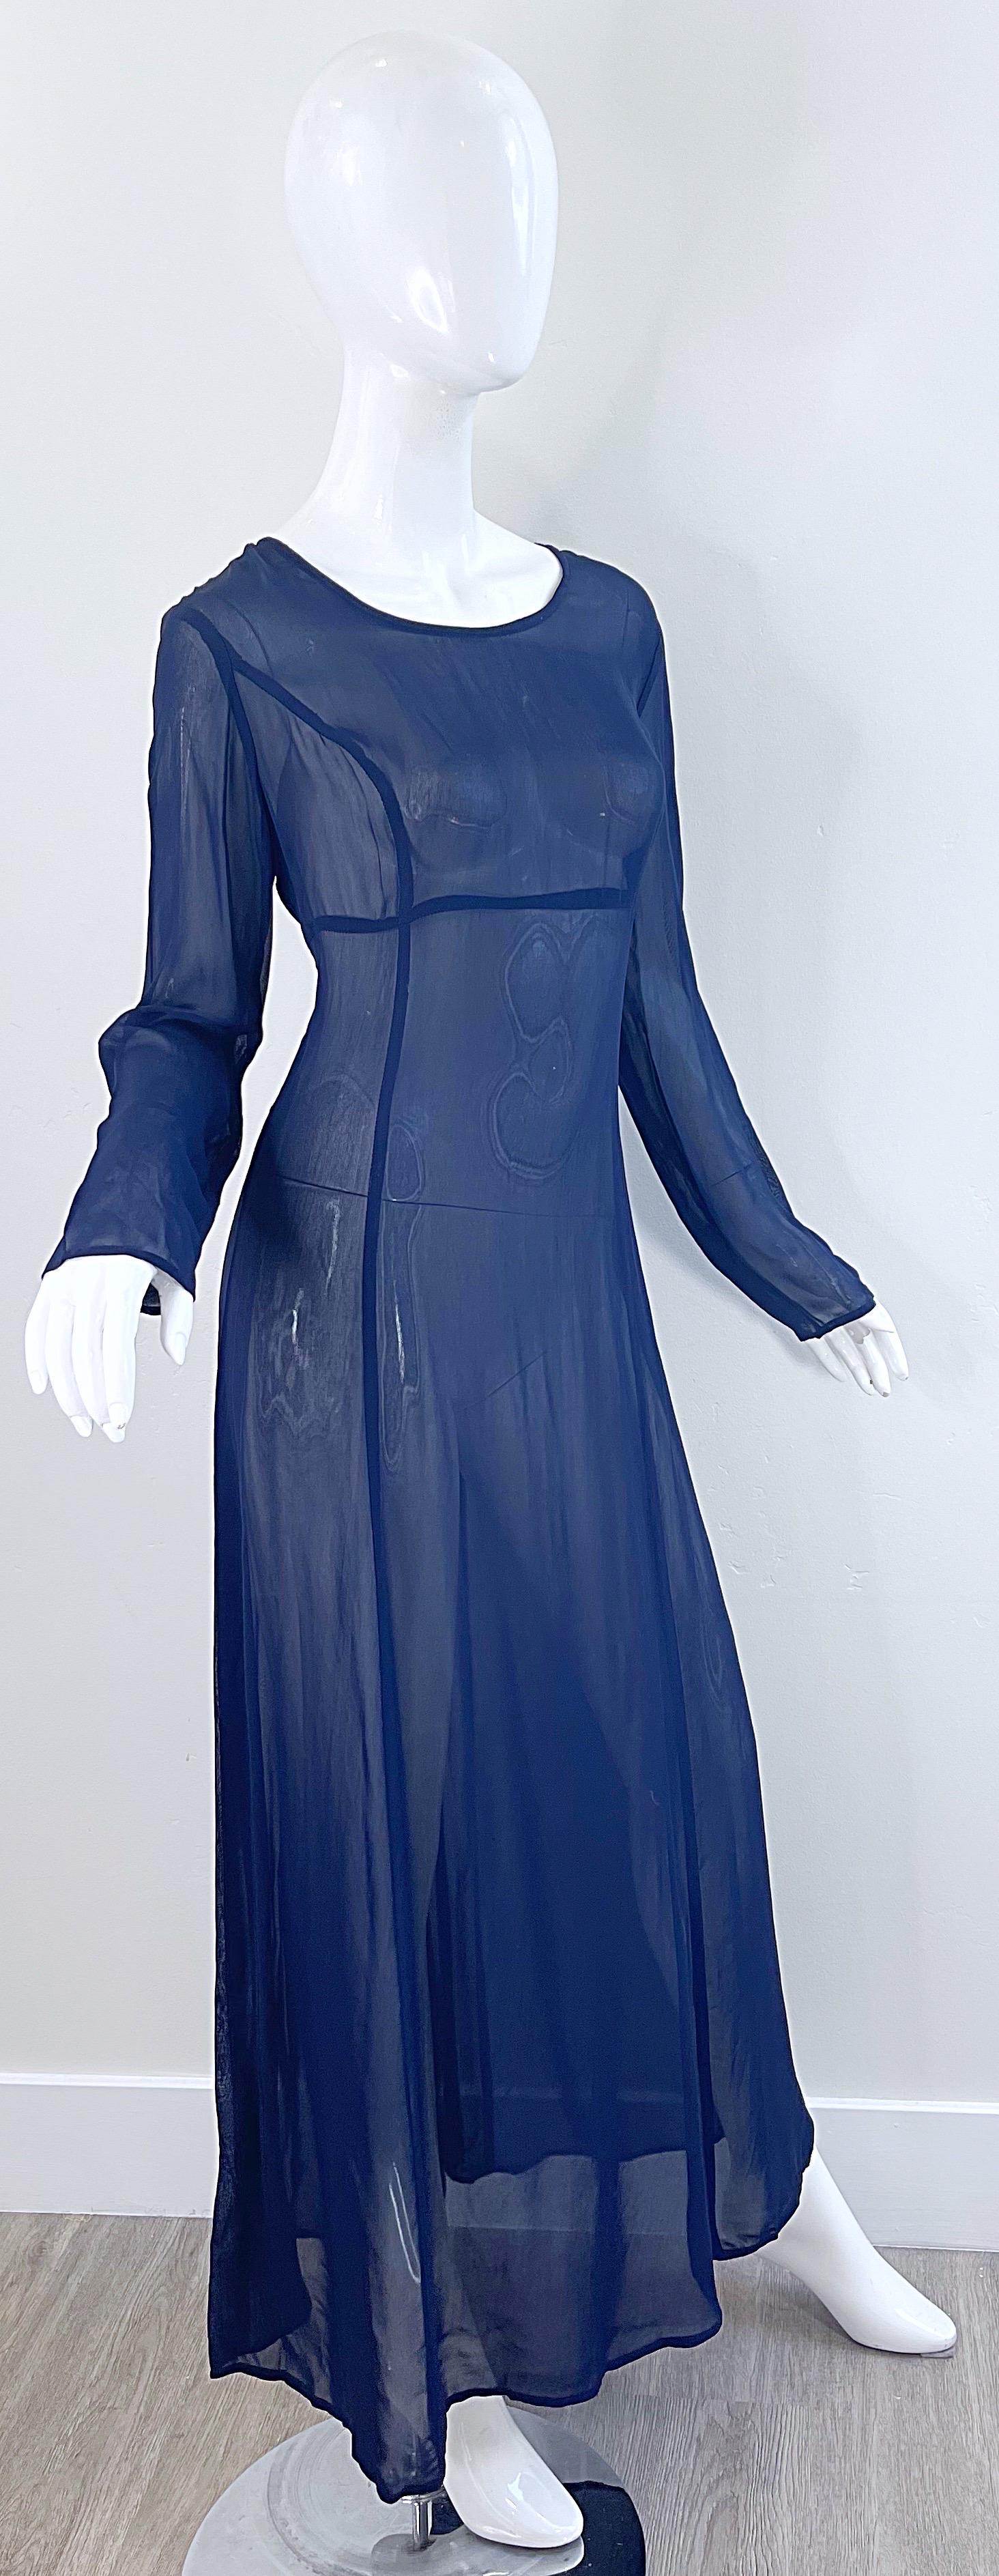 NWT 1990s I Magnin Size 10 Sheer Navy Blue Long Sleeve Vintage 90s Maxi Dress For Sale 6